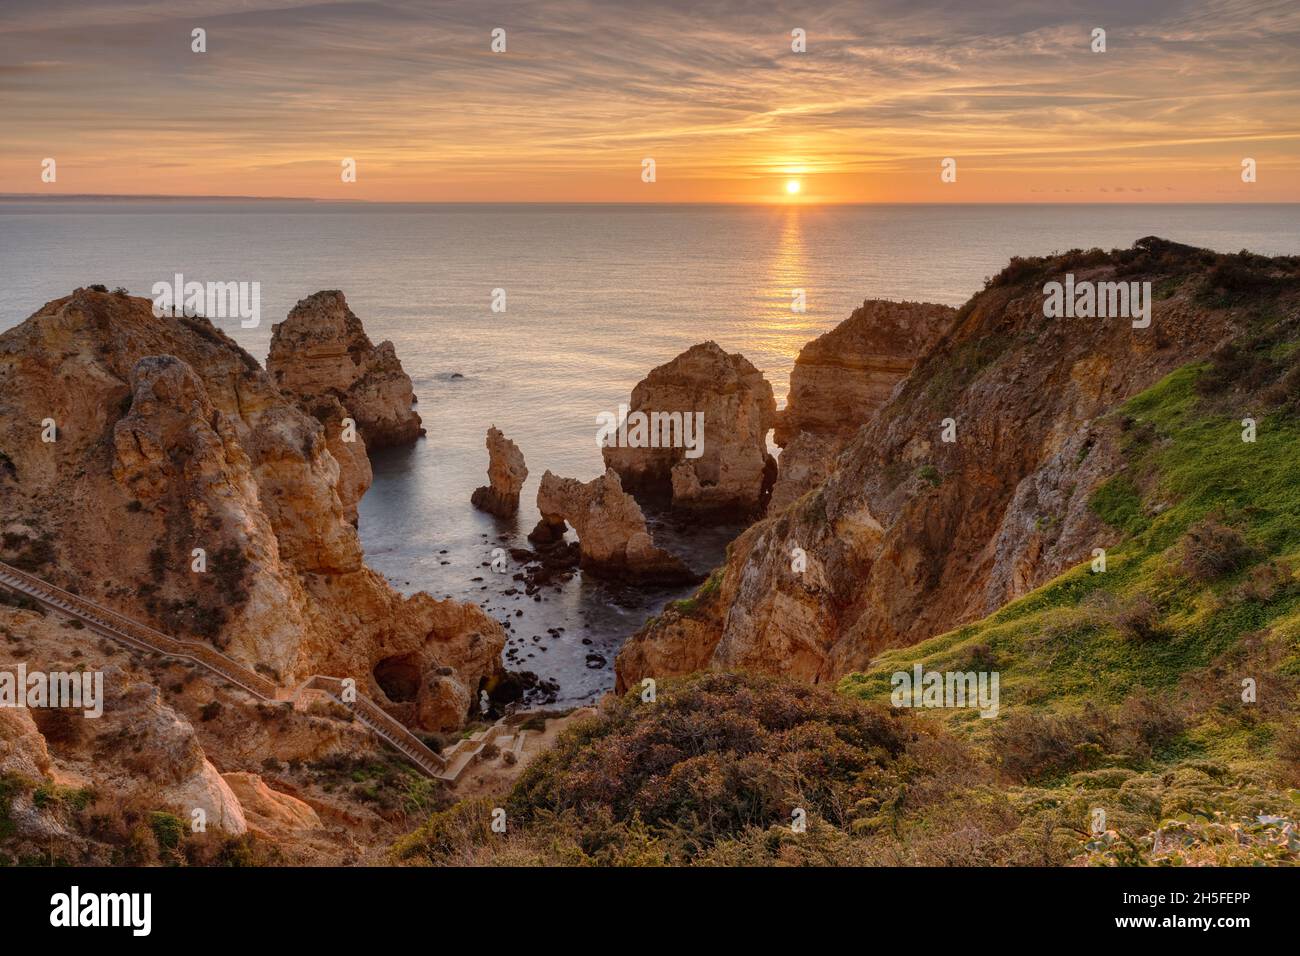 Ponta da Piedade ia a headland with spectacular and scenic rock formations near the town of Lagos in the Algarve region of Portugal. Stock Photo